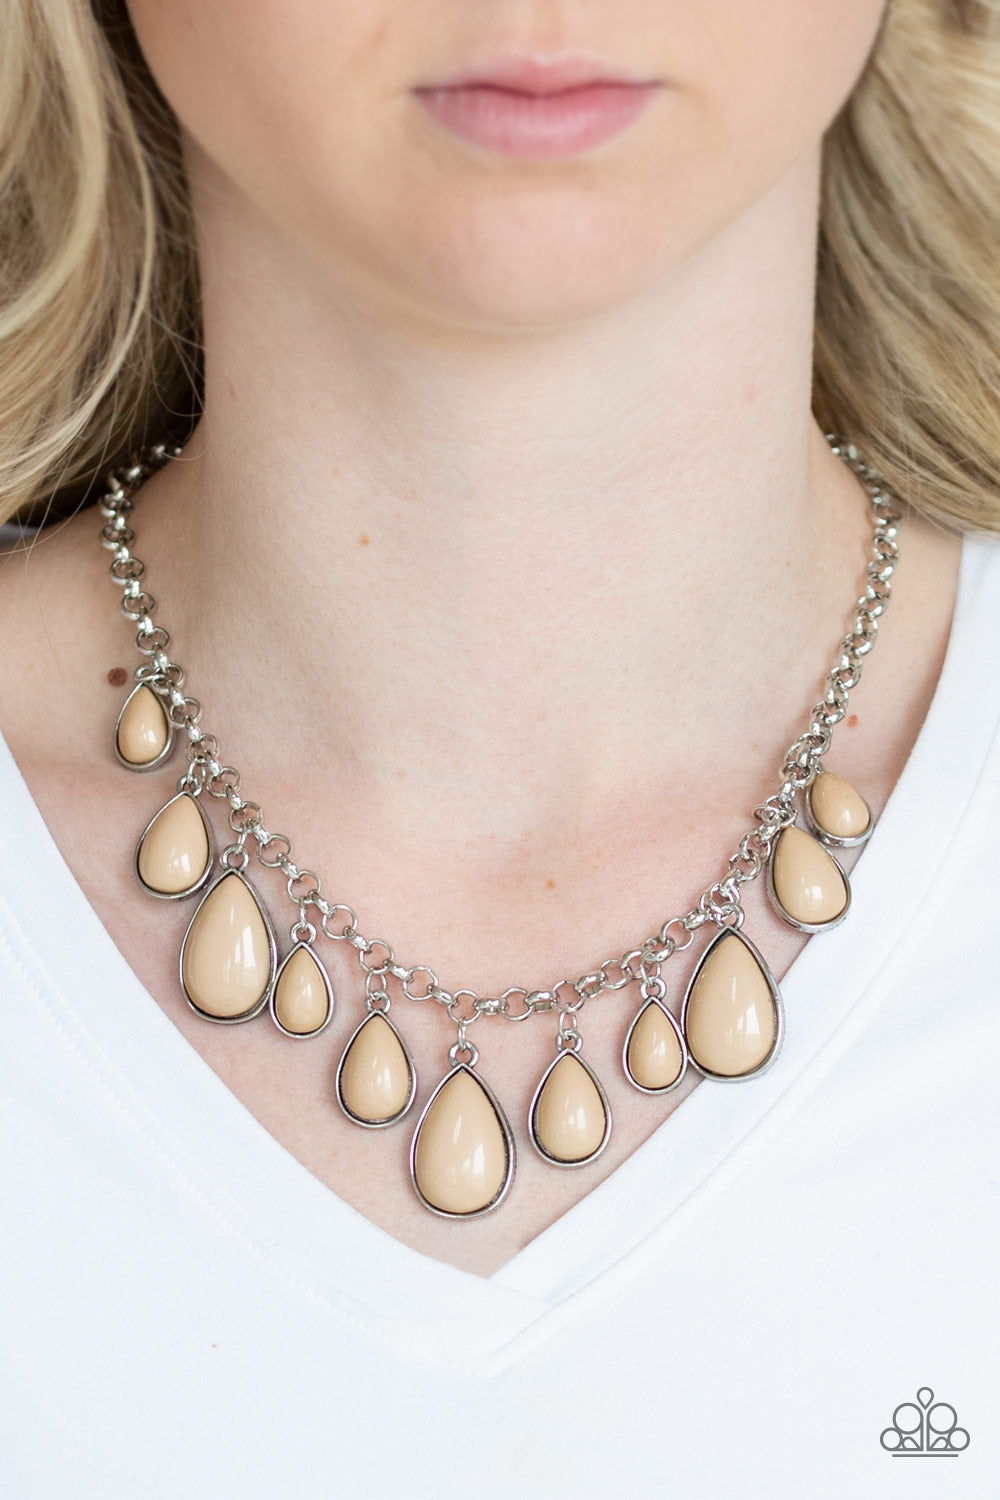 Paparazzi Accessories - Jaw-Dropping Diva - Brown Necklace